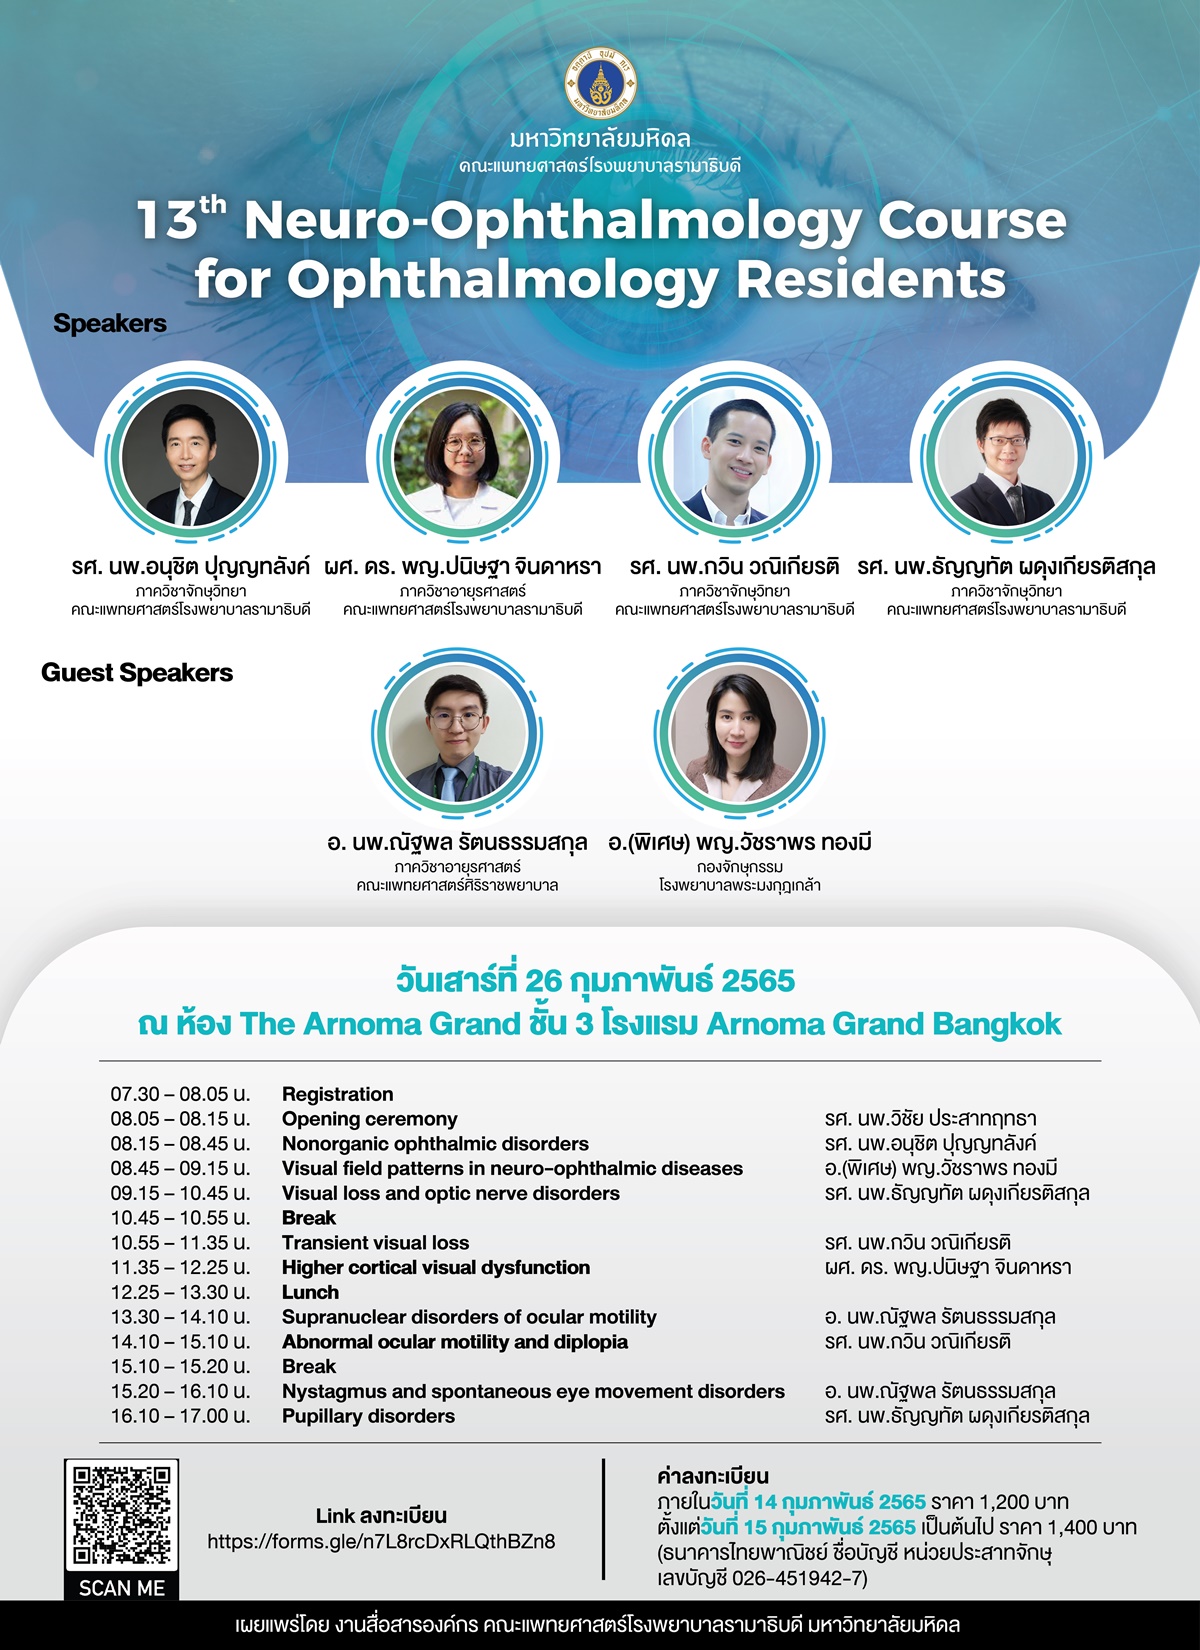 13th Neuro-Ophthalmology Course for Ophthalmology Residents